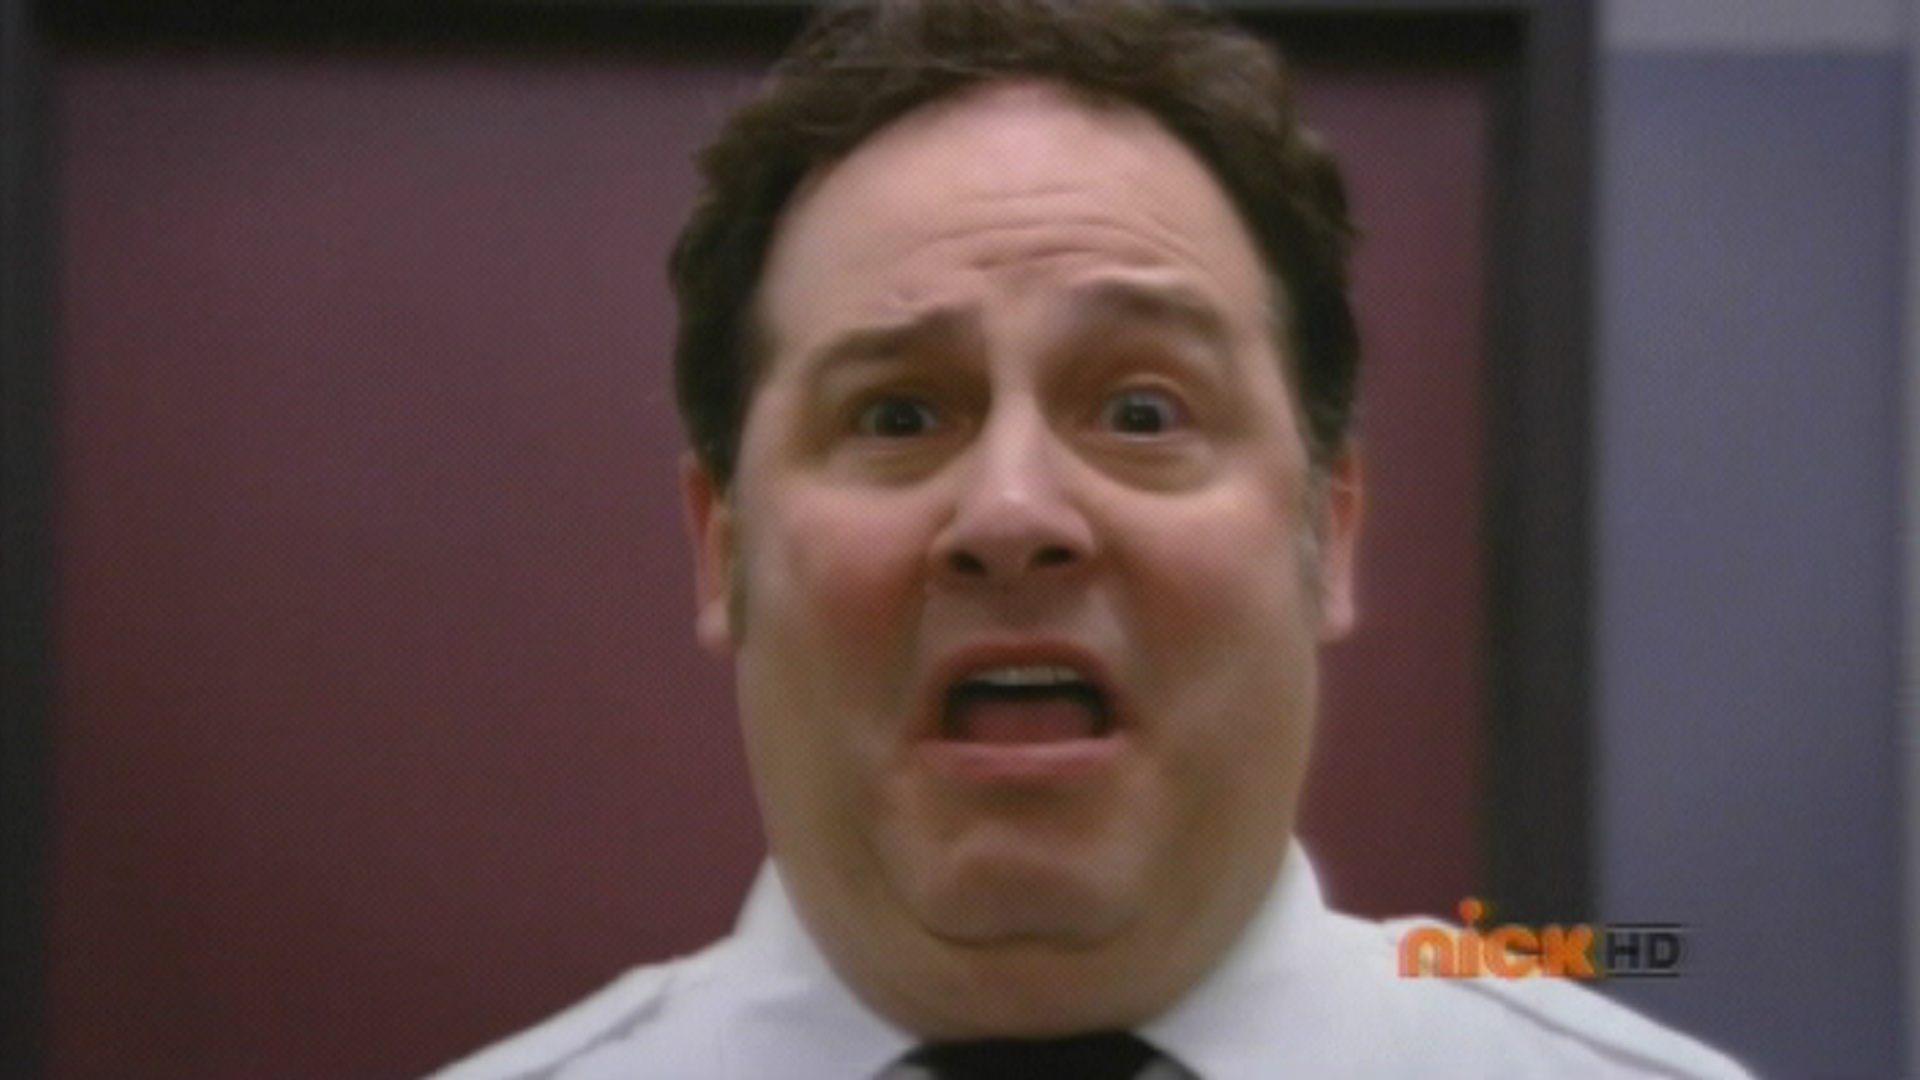 Production still from Marvin Marvin (Nickelodeon). Roger Rignack as the bumbling security guard.